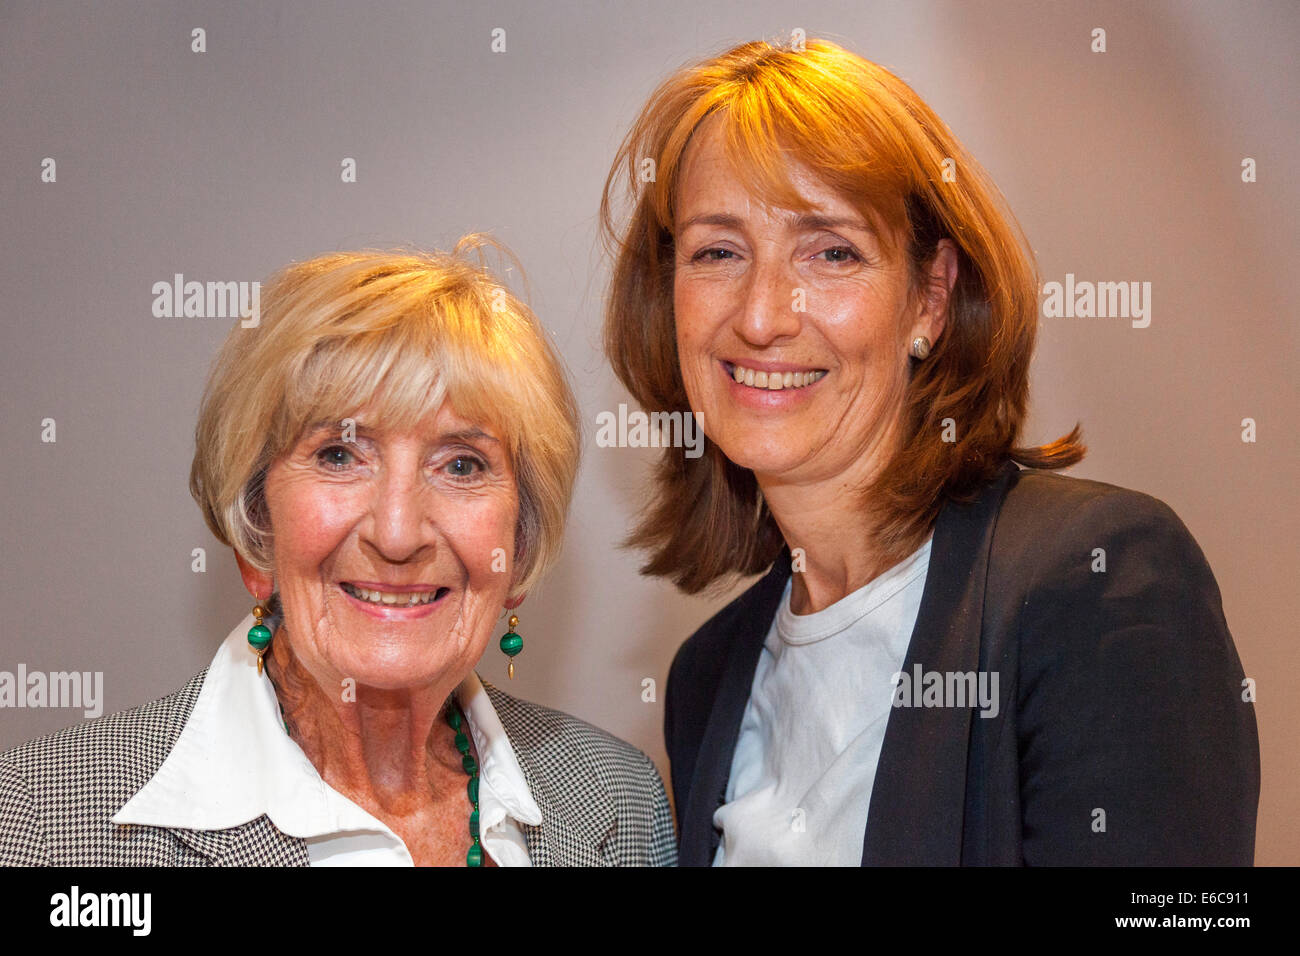 London, England, UK, 19 August 2014. Legendary BAFTA-Award winning multi-camera television drama director Moira Armstrong (L) with interviewer Francine Stock (R) at an event in Miss Armstrong’s honour organised by the British Film Institute (BFI). Credit:  John Henshall / Alamy Live News PER0424 Stock Photo